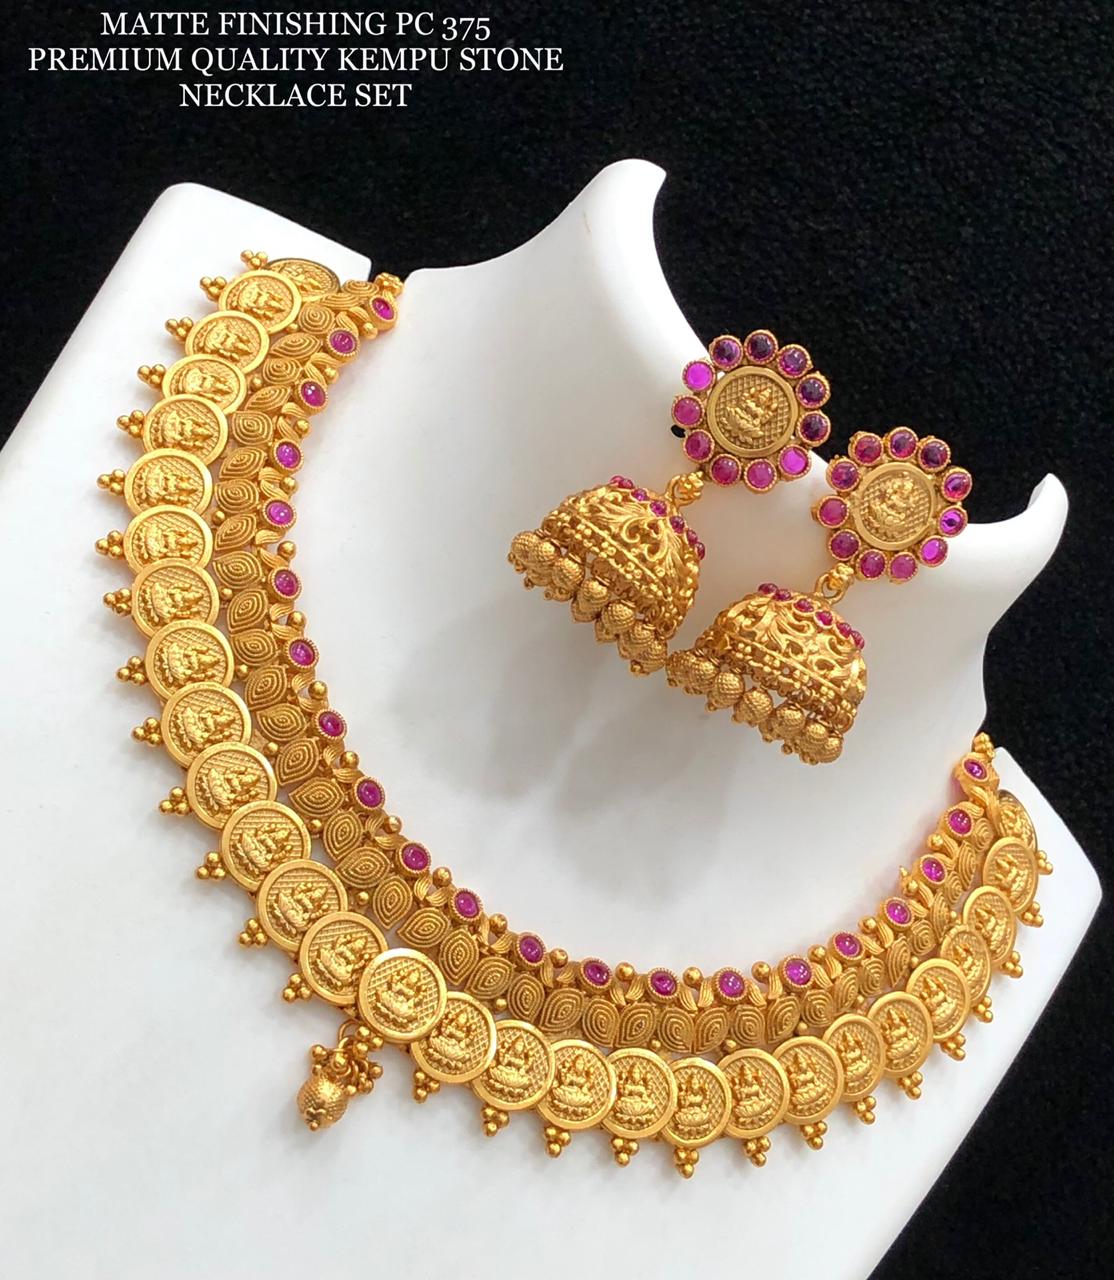 Latest Trending New Gold Jewellery Collection - Indian Jewelry Designs